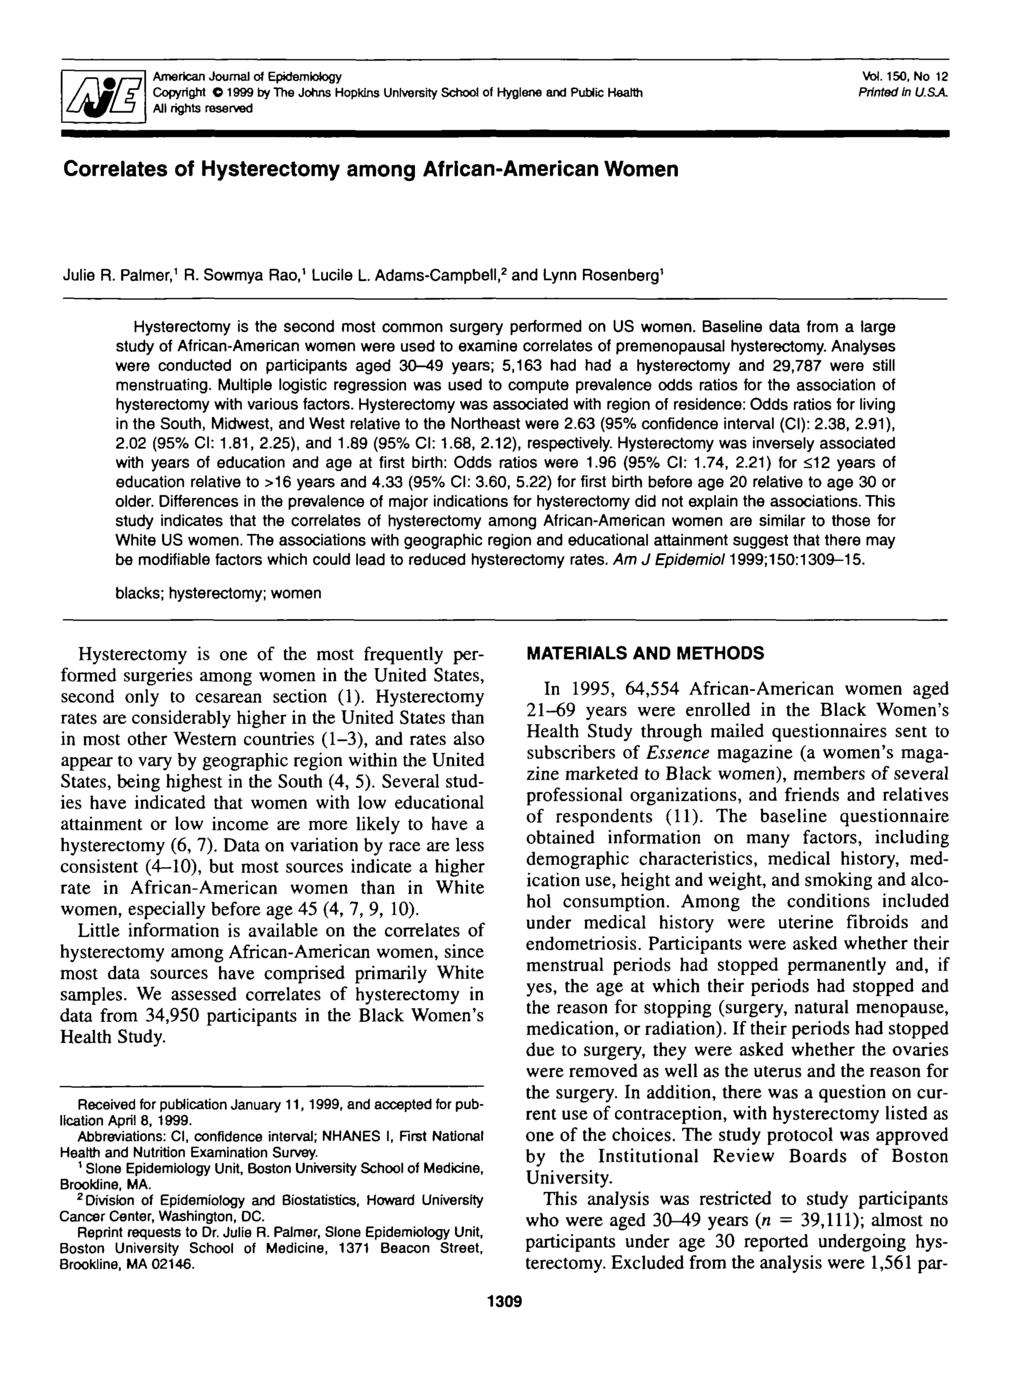 American Journal of Epidemiology Copyright O 99 by The Johns Hopkins University School of Hygiene and Public Health All rights reserved Vol. 150, Printed In USA.